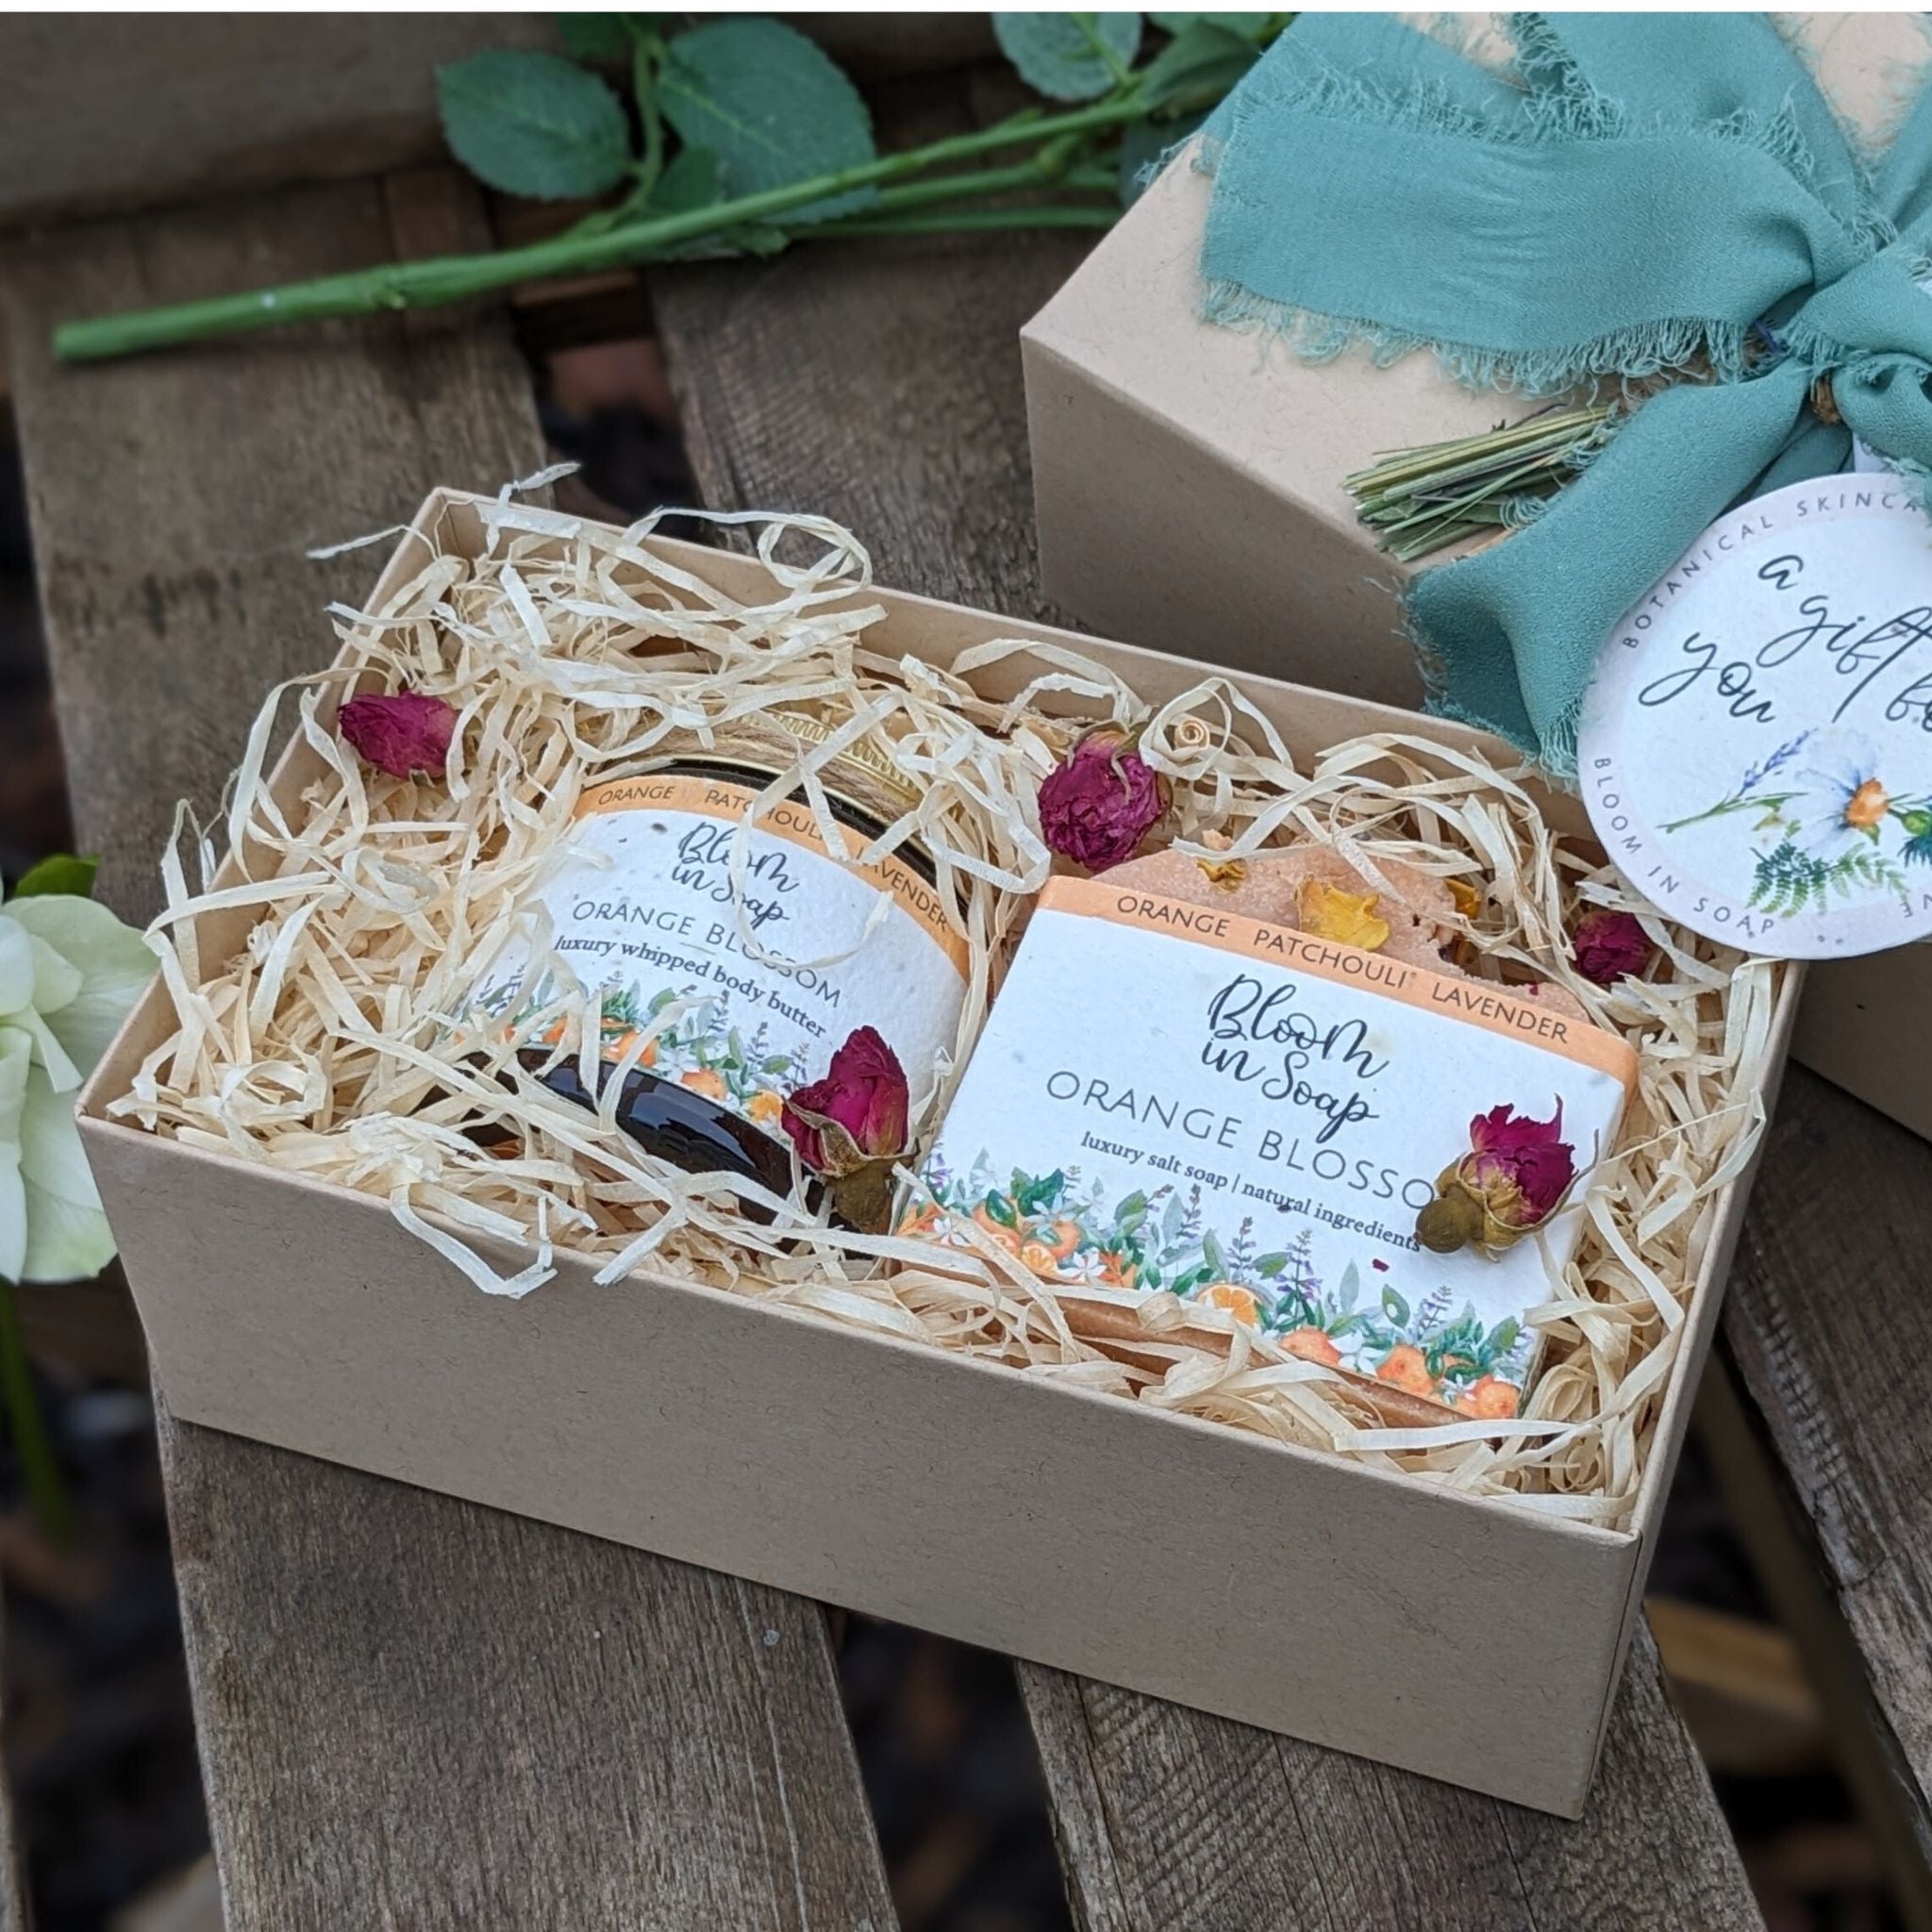 Find Our Lavender Spa Gift Boxes – The Artisan Gift Boxes